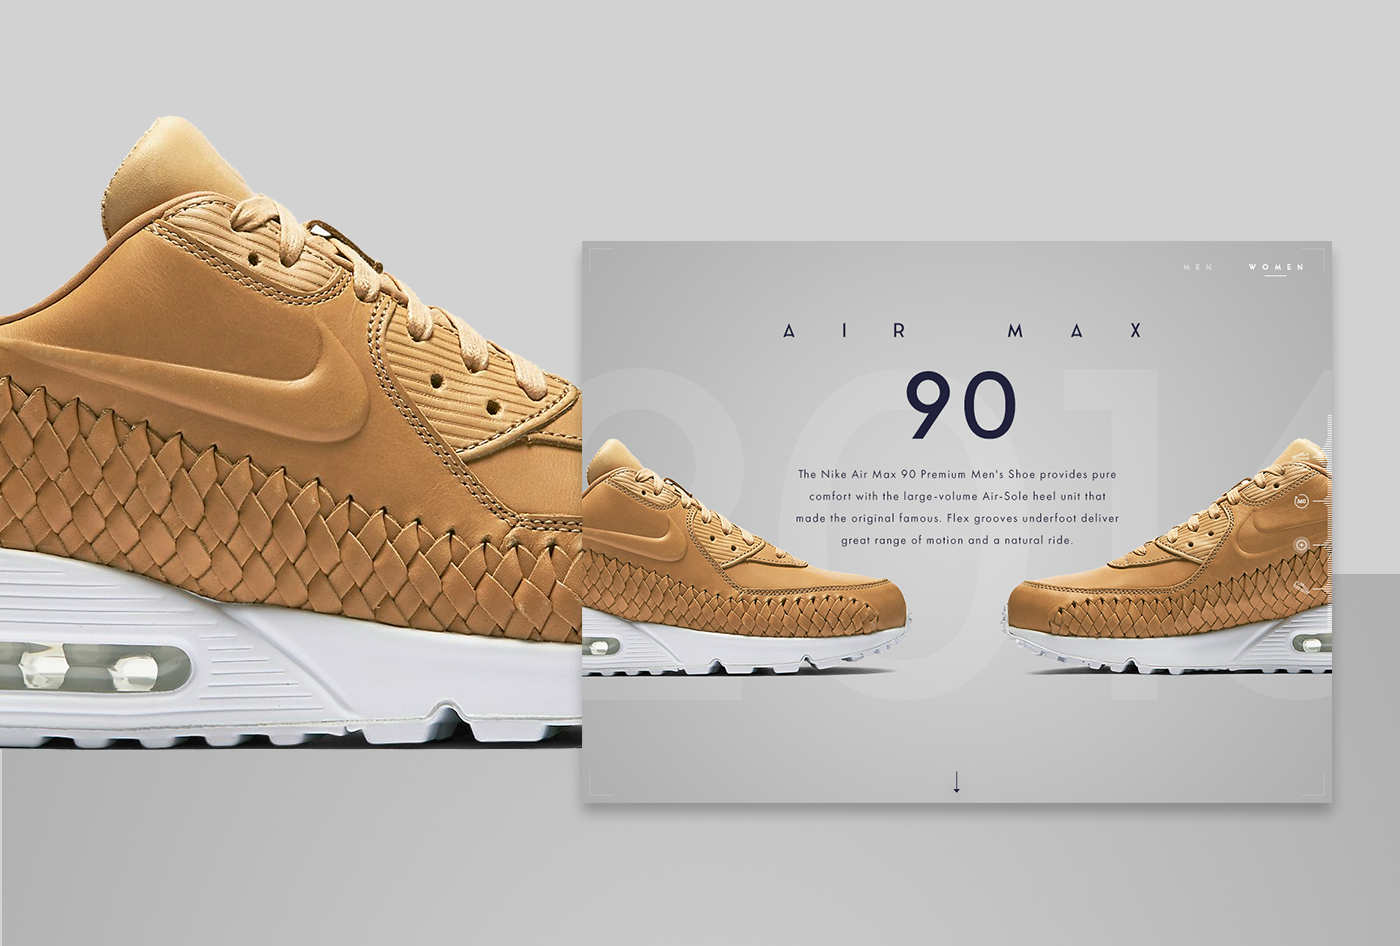 Nike air max tablet store shoes 3D map card sneakers interaction